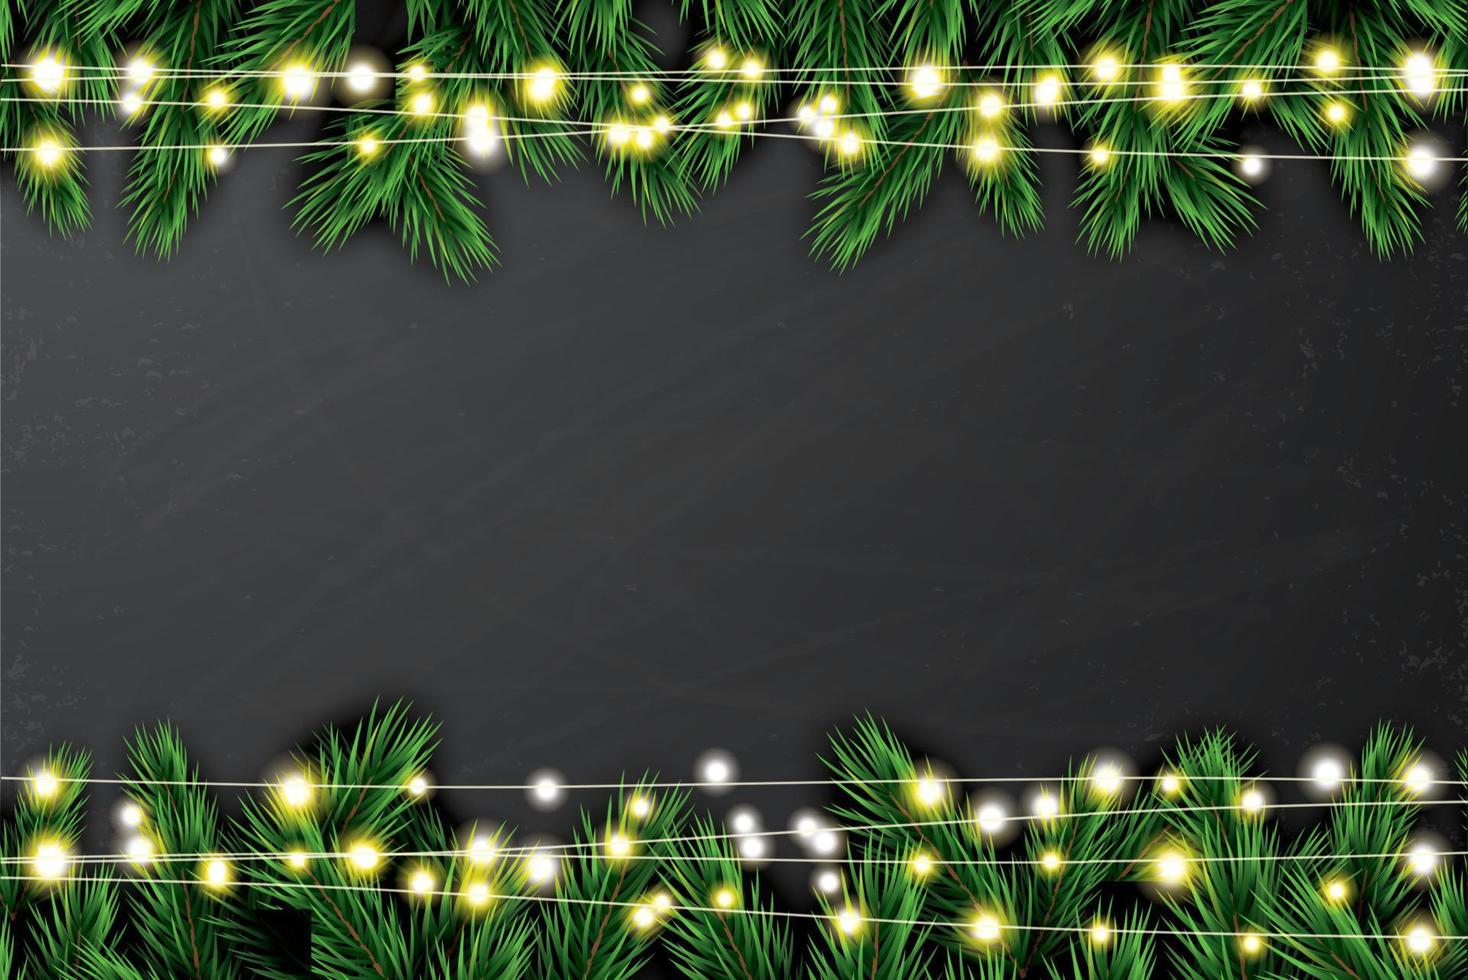 Fir Branch with Neon Lights on Chalkboard Background. vector